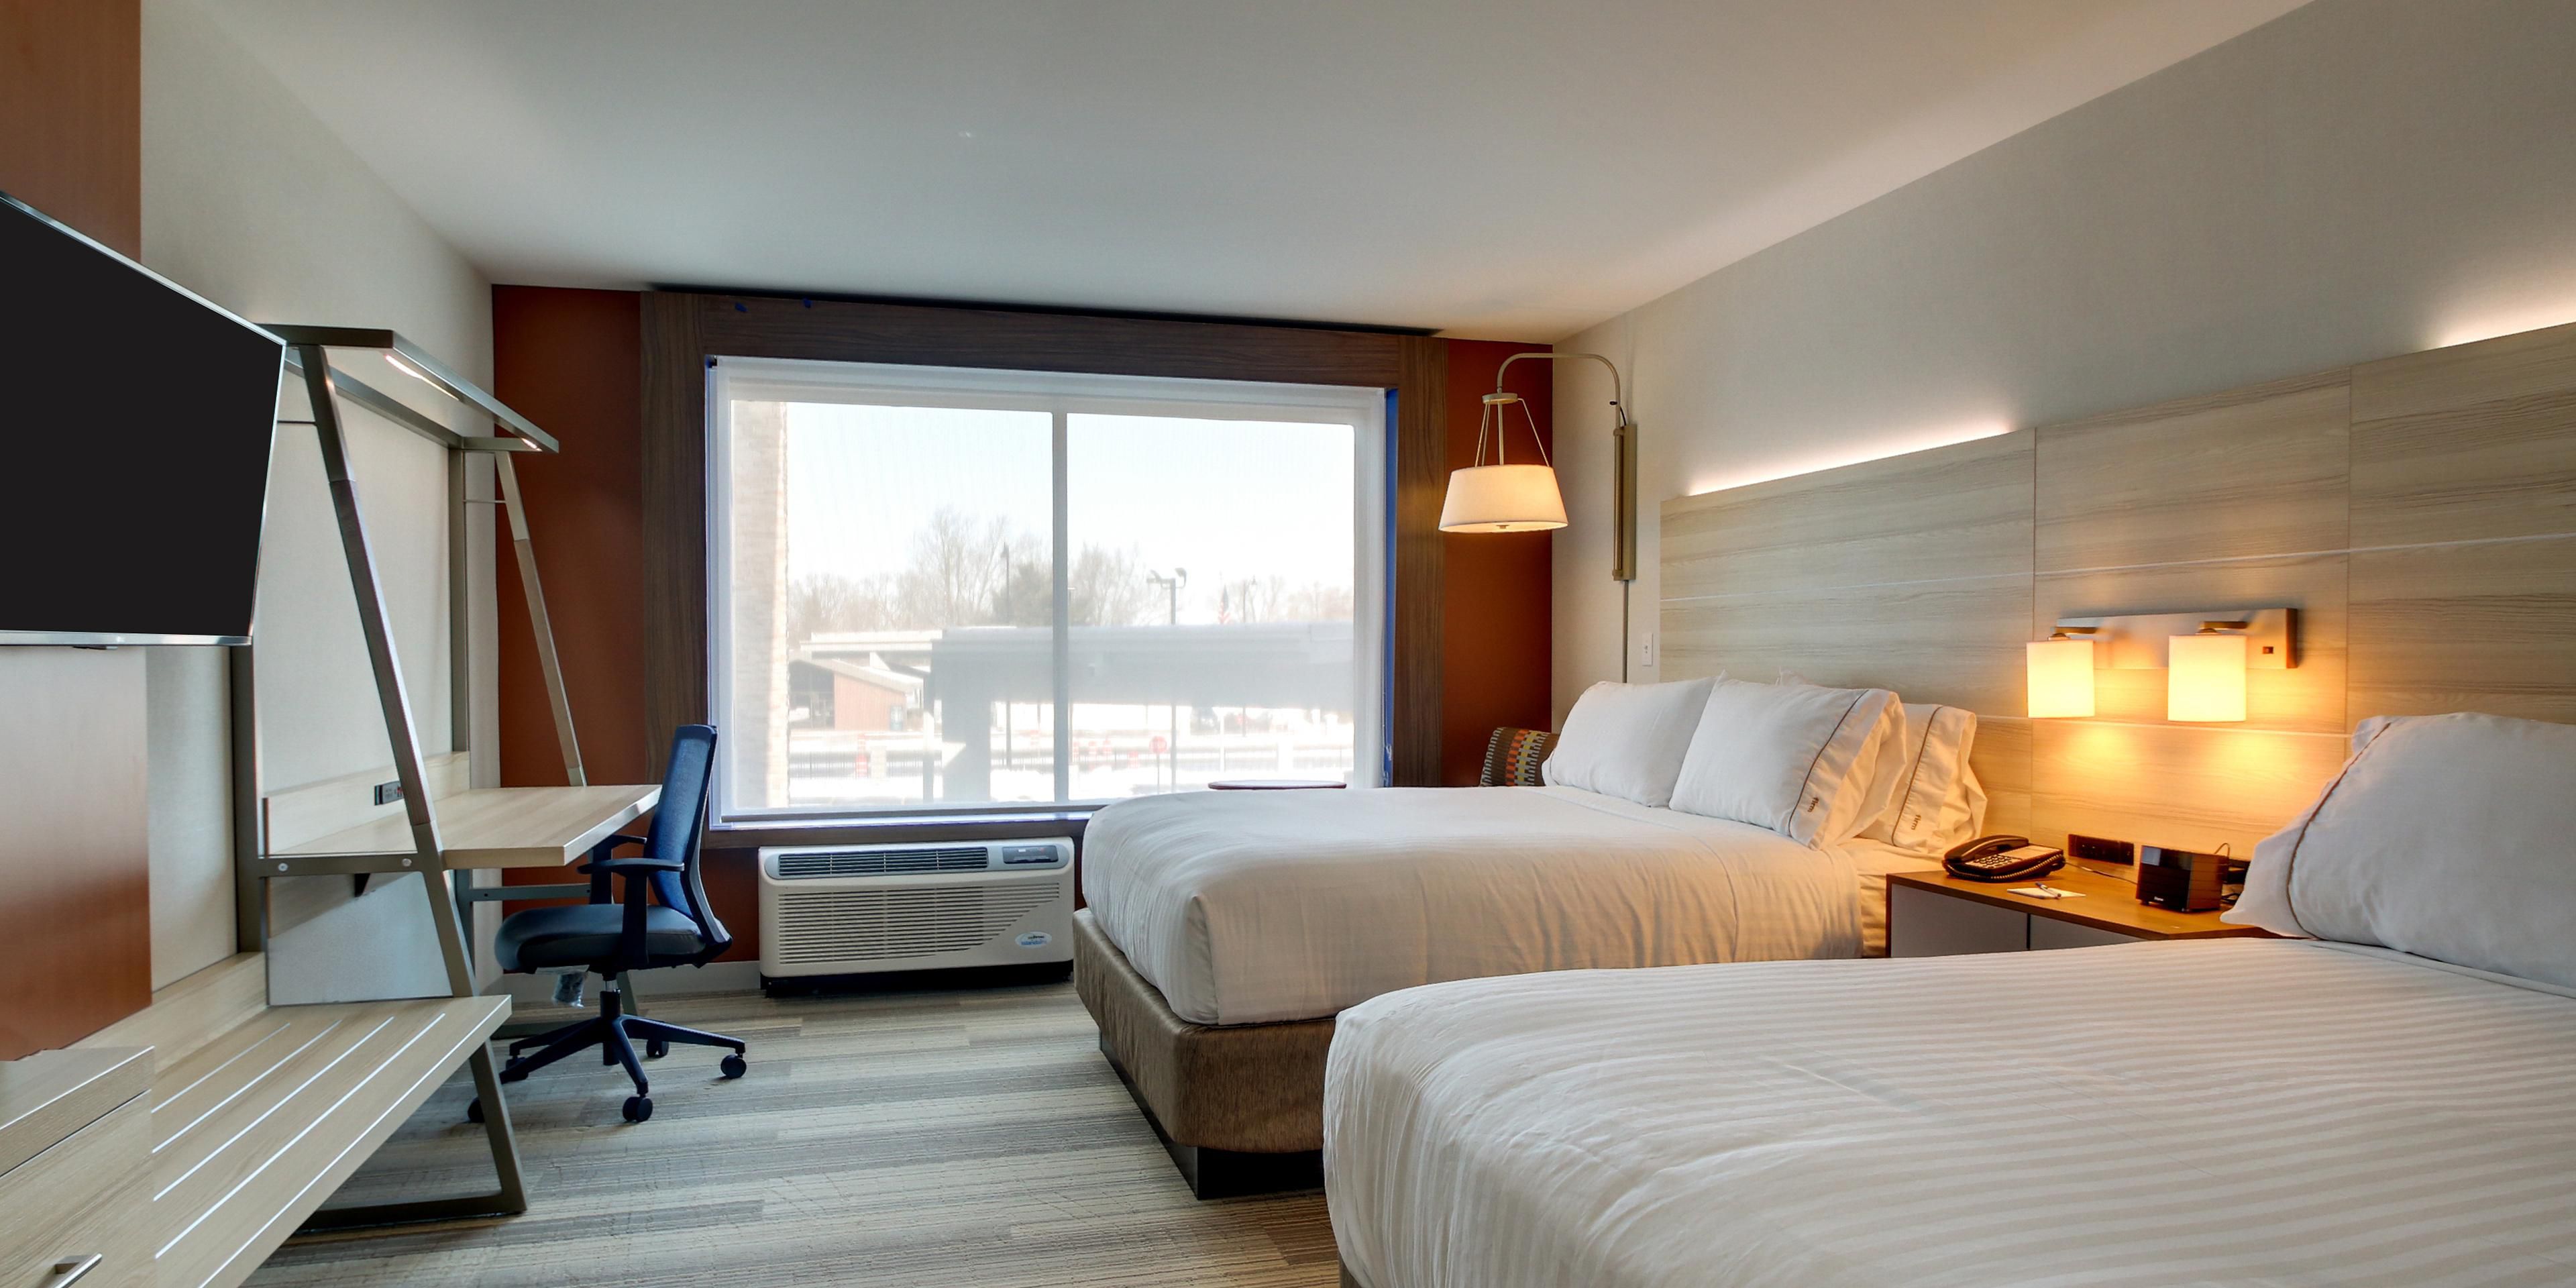 The Holiday Inn Express & Suites Lockport, IL features brand new guestrooms with free WiFi, flat screen TVs, microwaves, mini-refrigerators, and plenty of easily accessible outlets and USB connections.